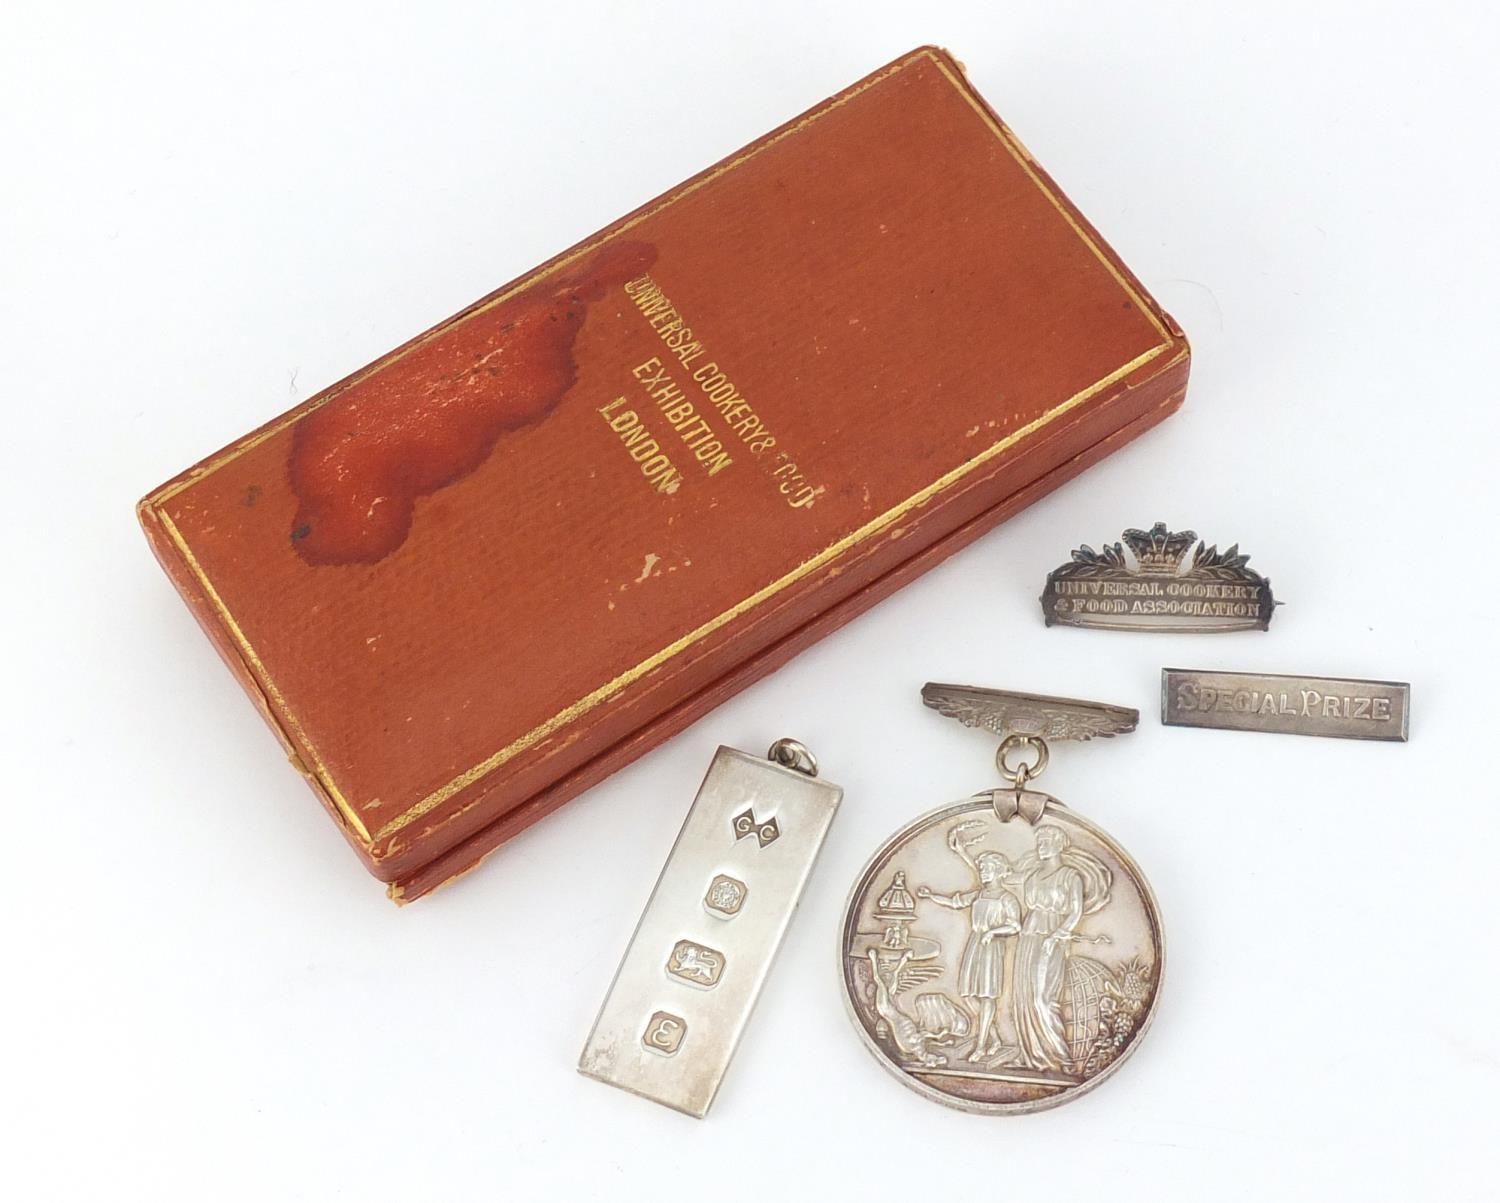 Universal Cookery and Food Exhibition silver special prize medal, with fitted case, engraved - Image 2 of 16